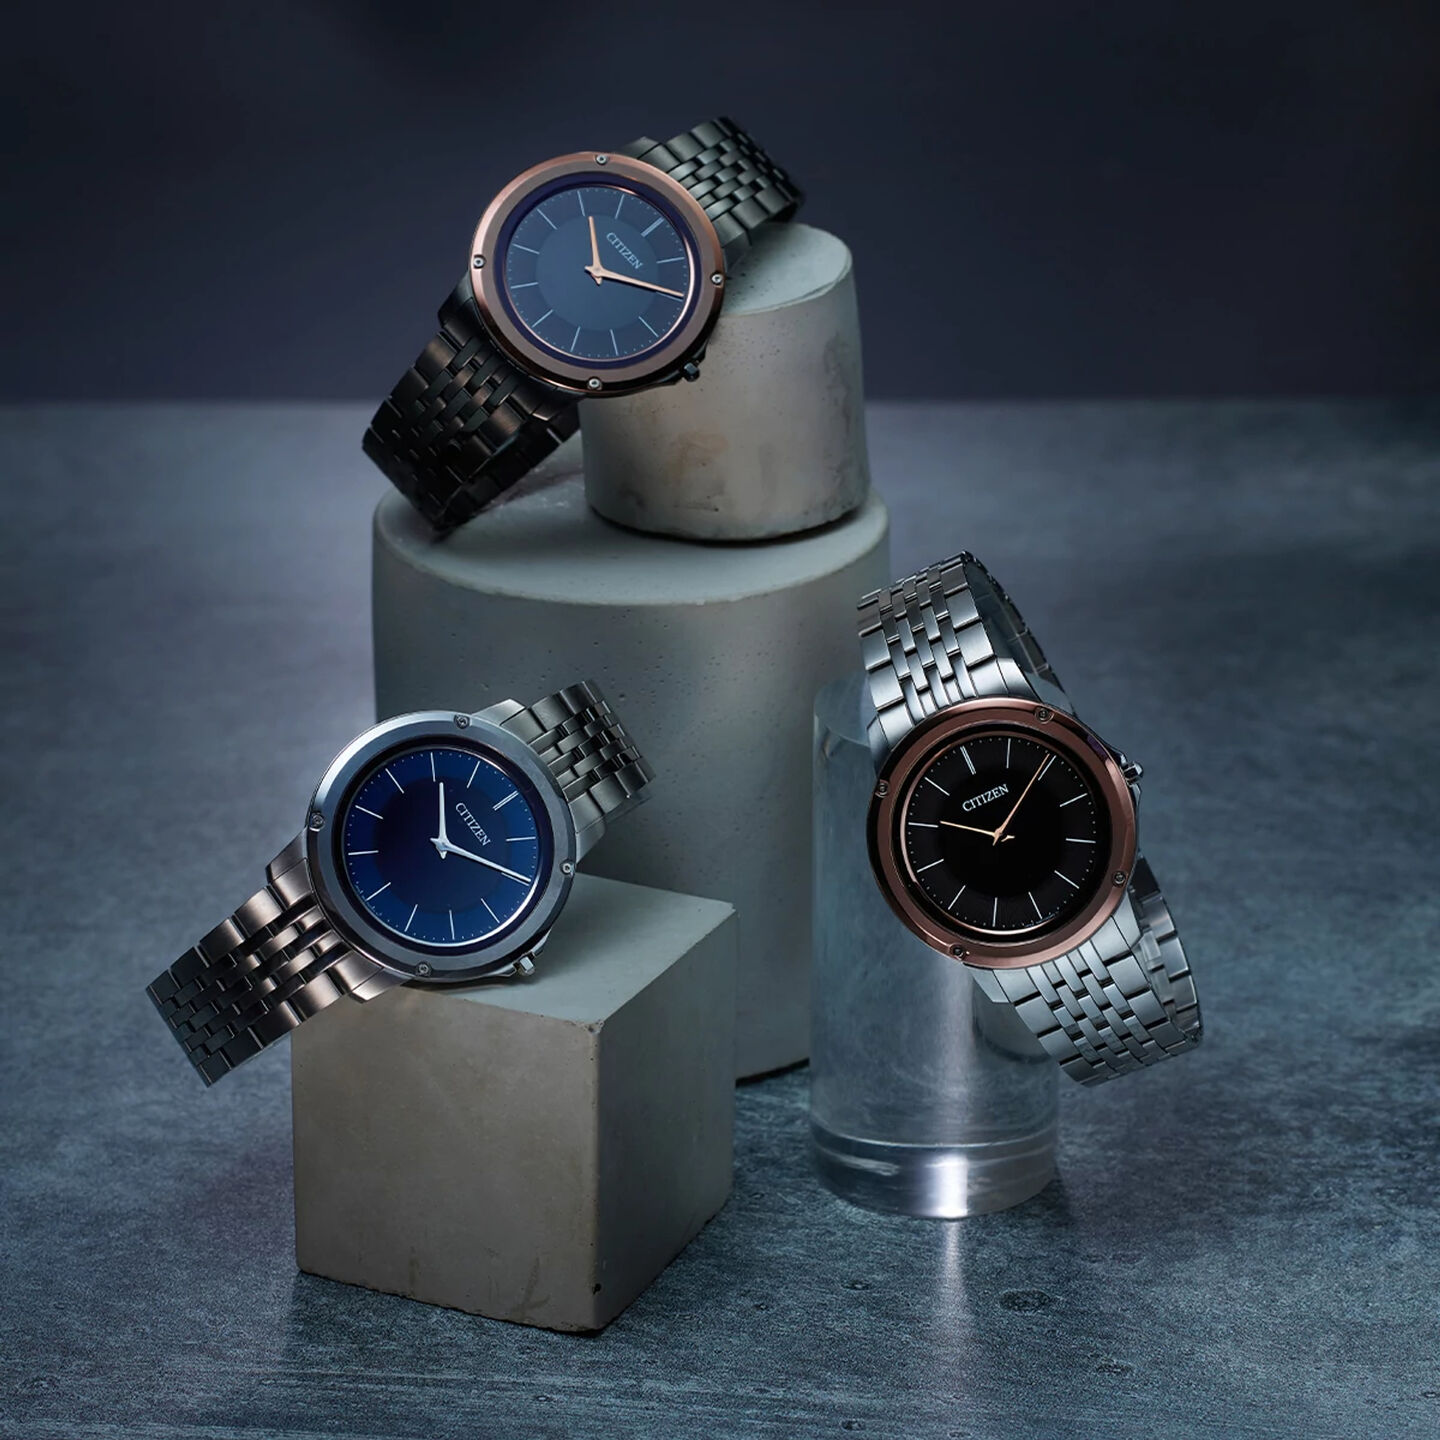 Eco-Drive One Watches - Our Thinnest Light-Powered Watch.